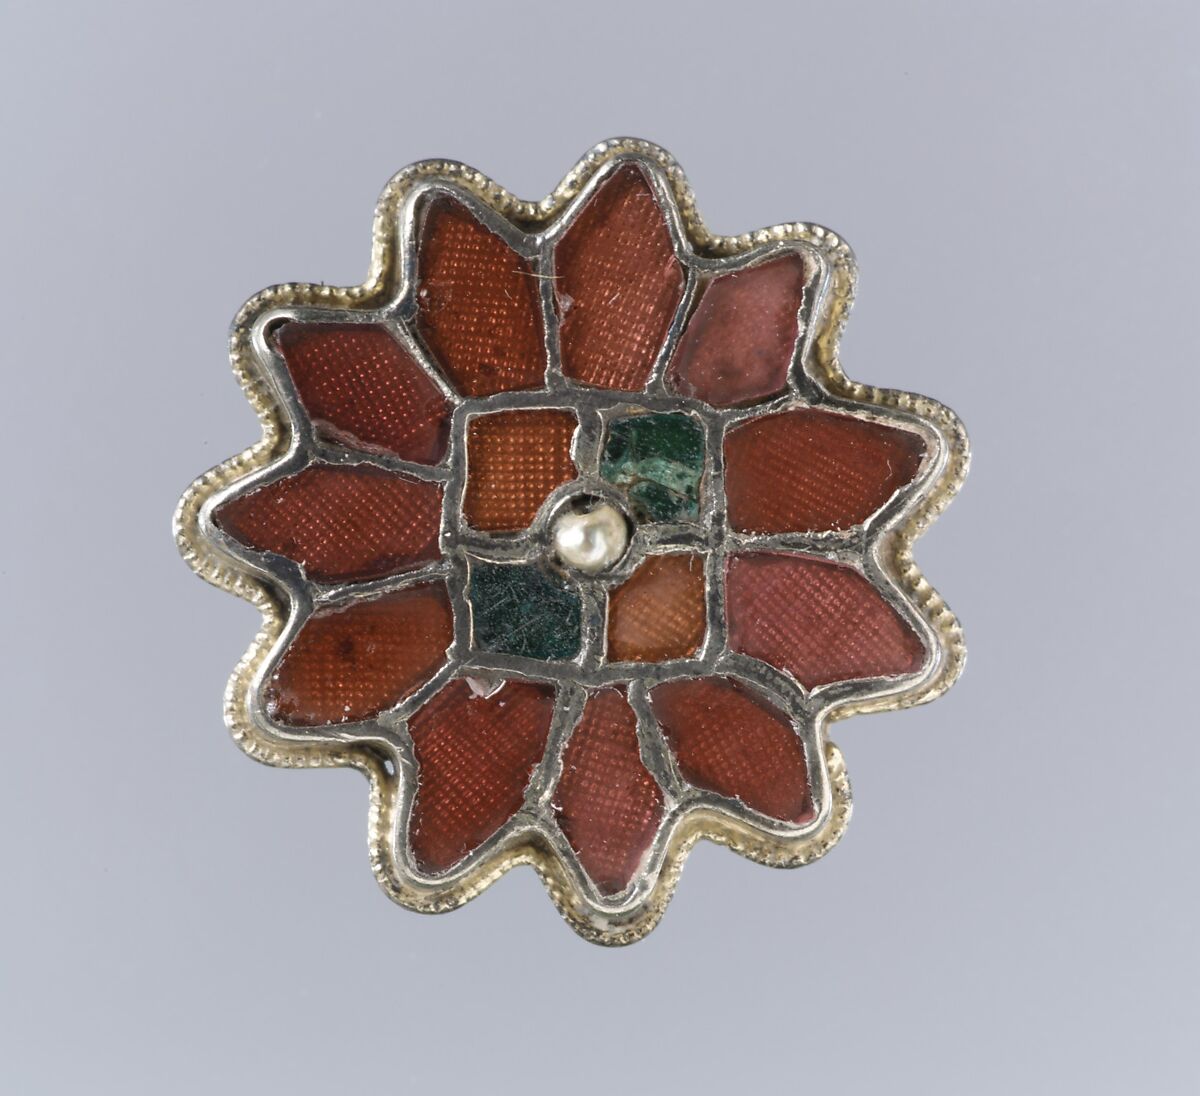 Rosette Brooch, Silver-gilt, garnets with patterned foil backings, green glass, pearl, Frankish